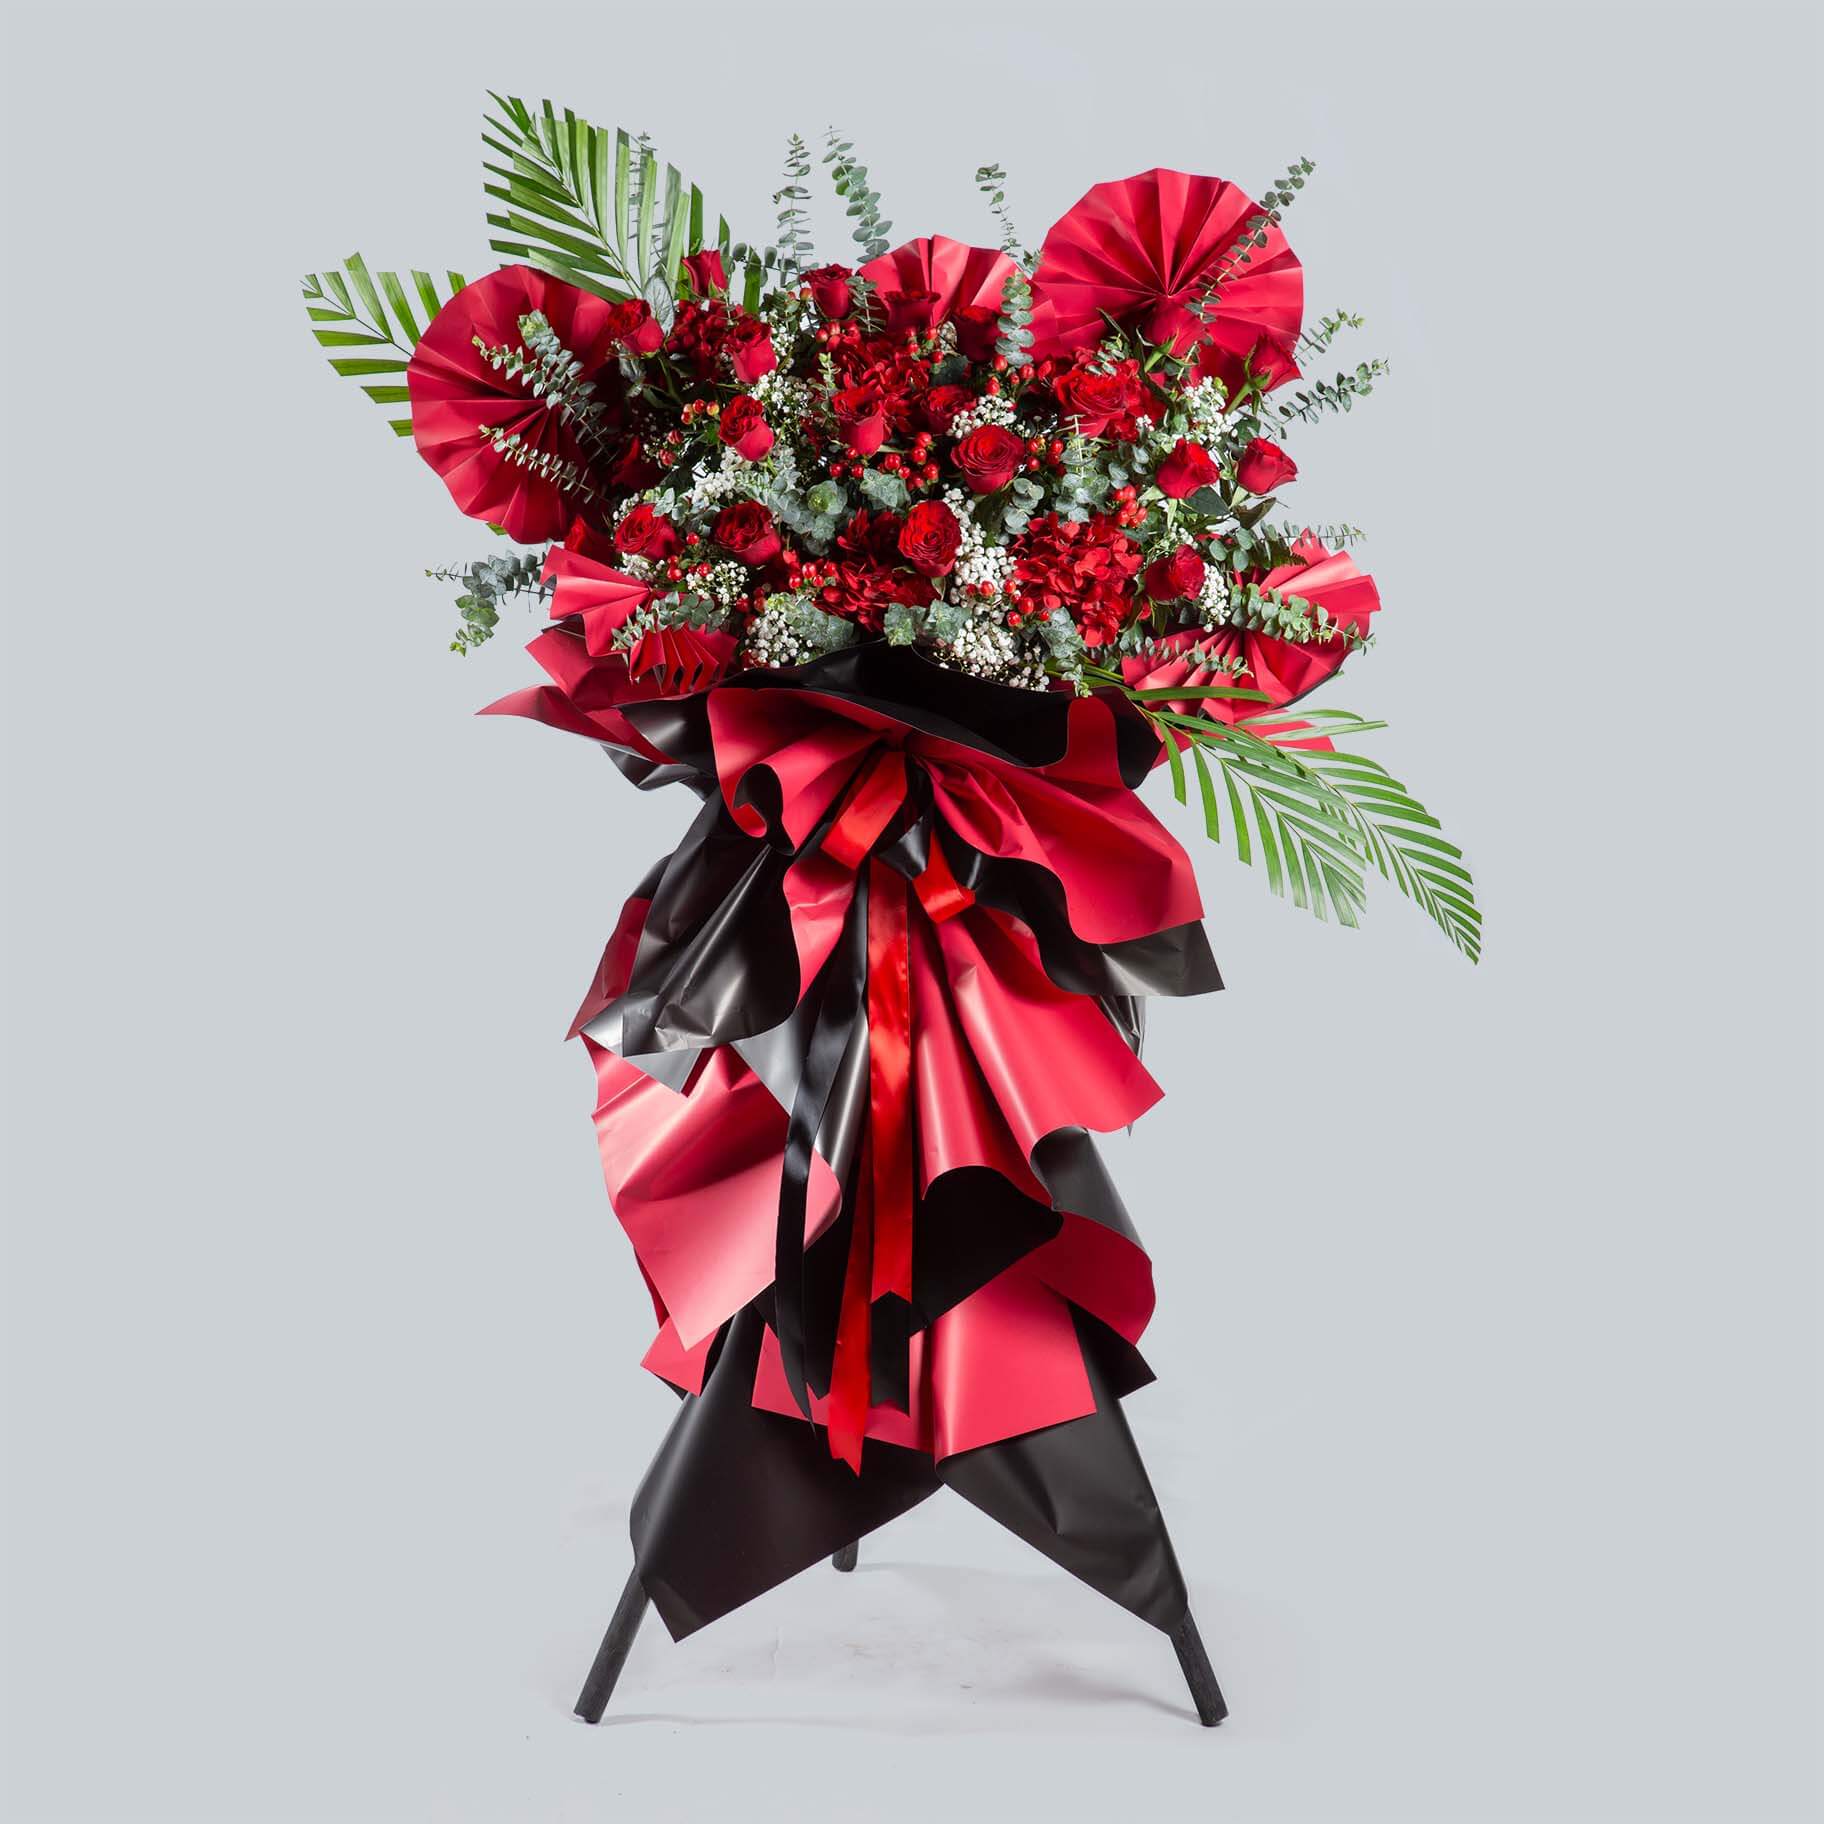 Our Top 5 Picks for the Best Congratulatory Flower Stands